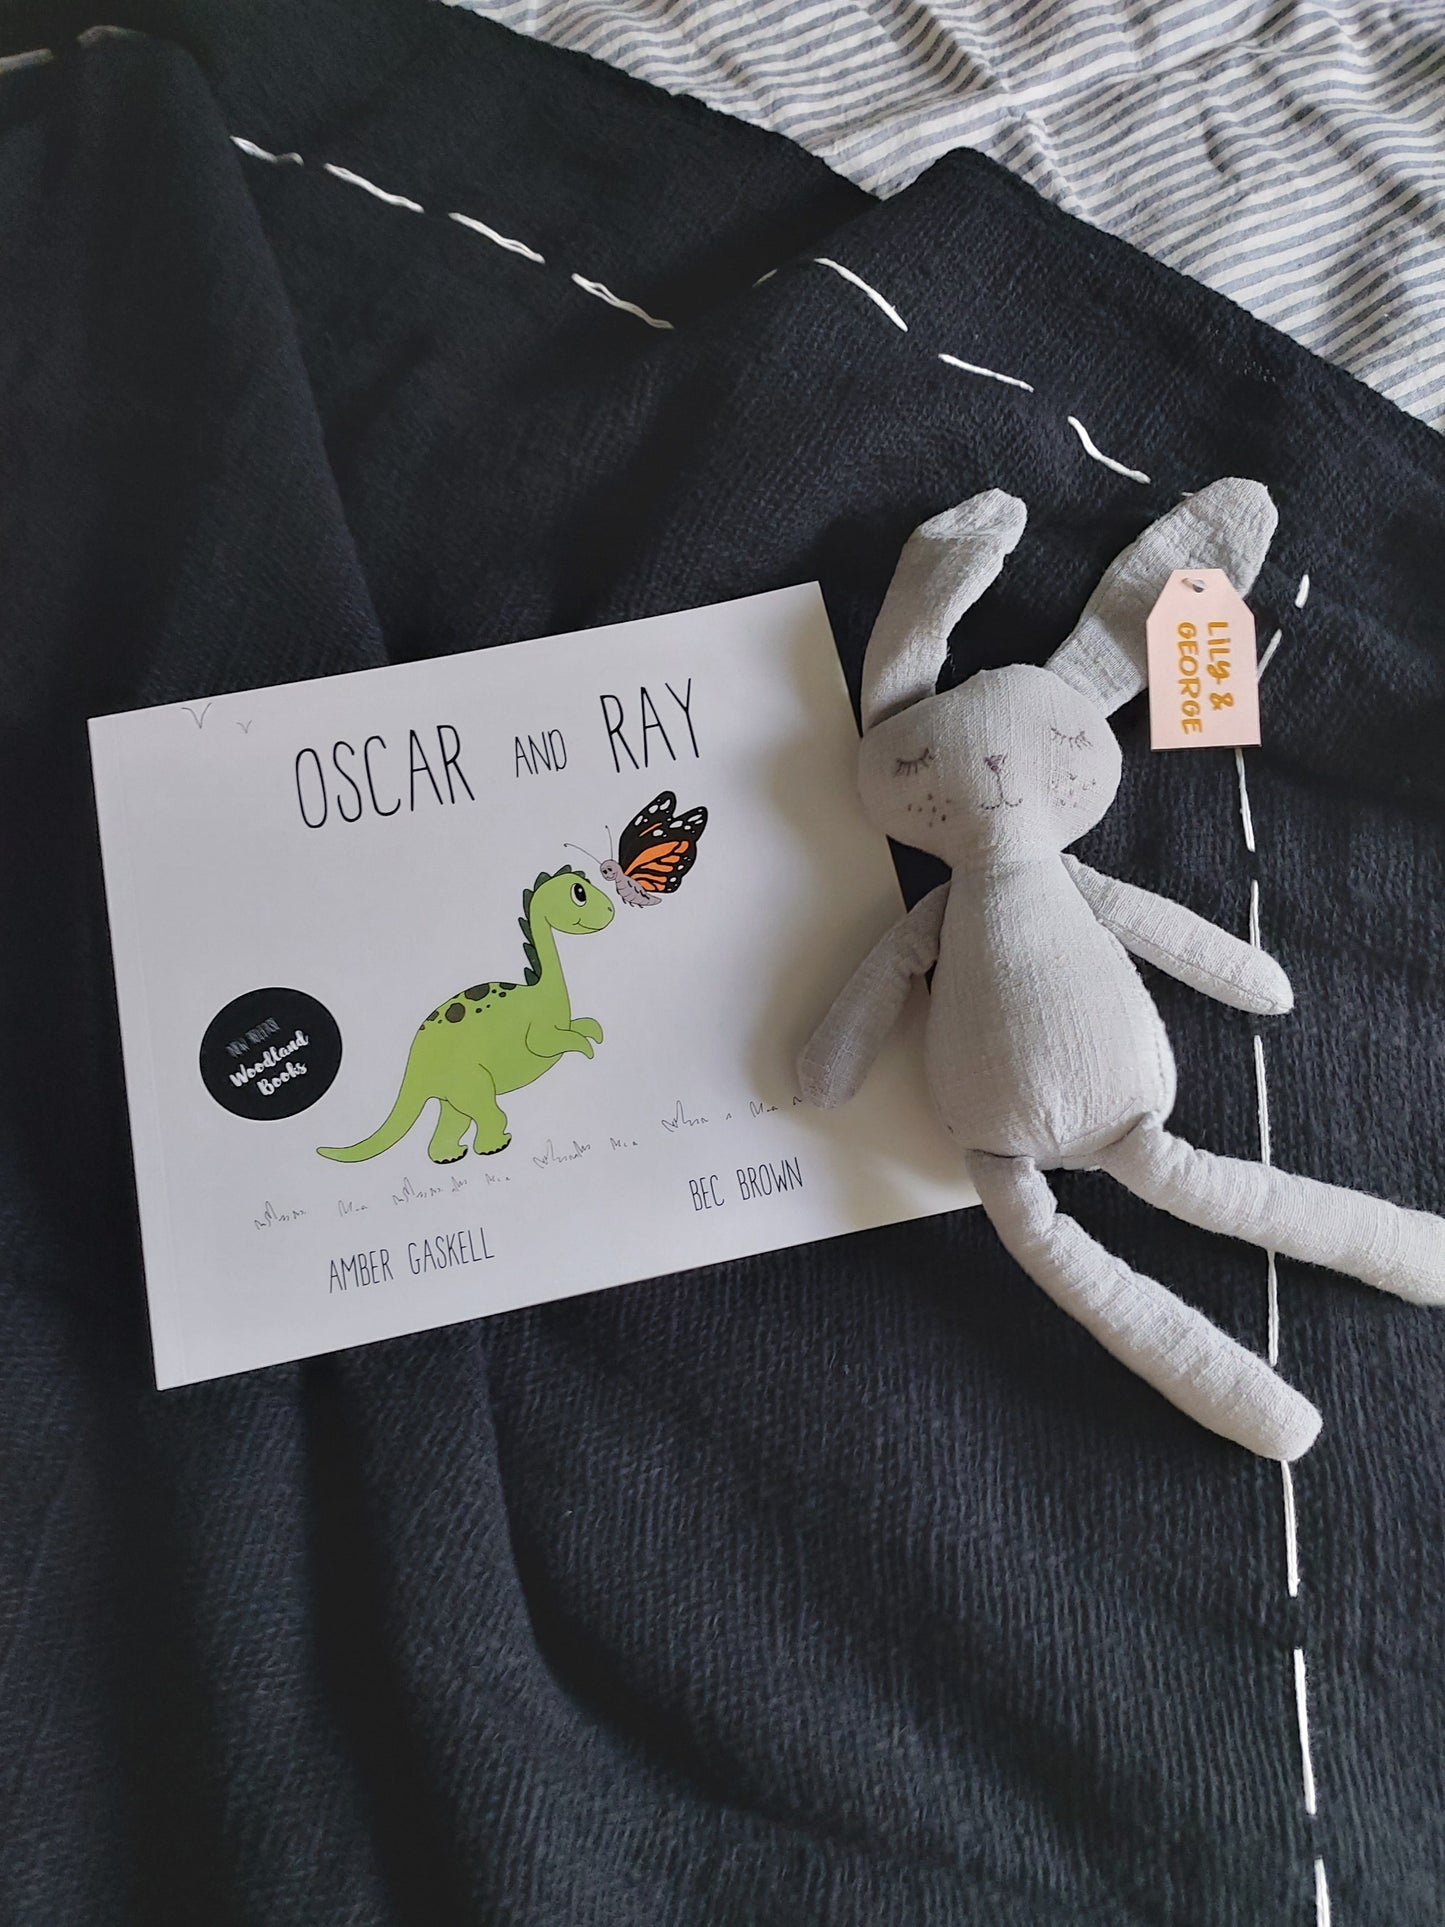 Oscar & Ray by Amber Gaskell - Illustrated by Bec Brown